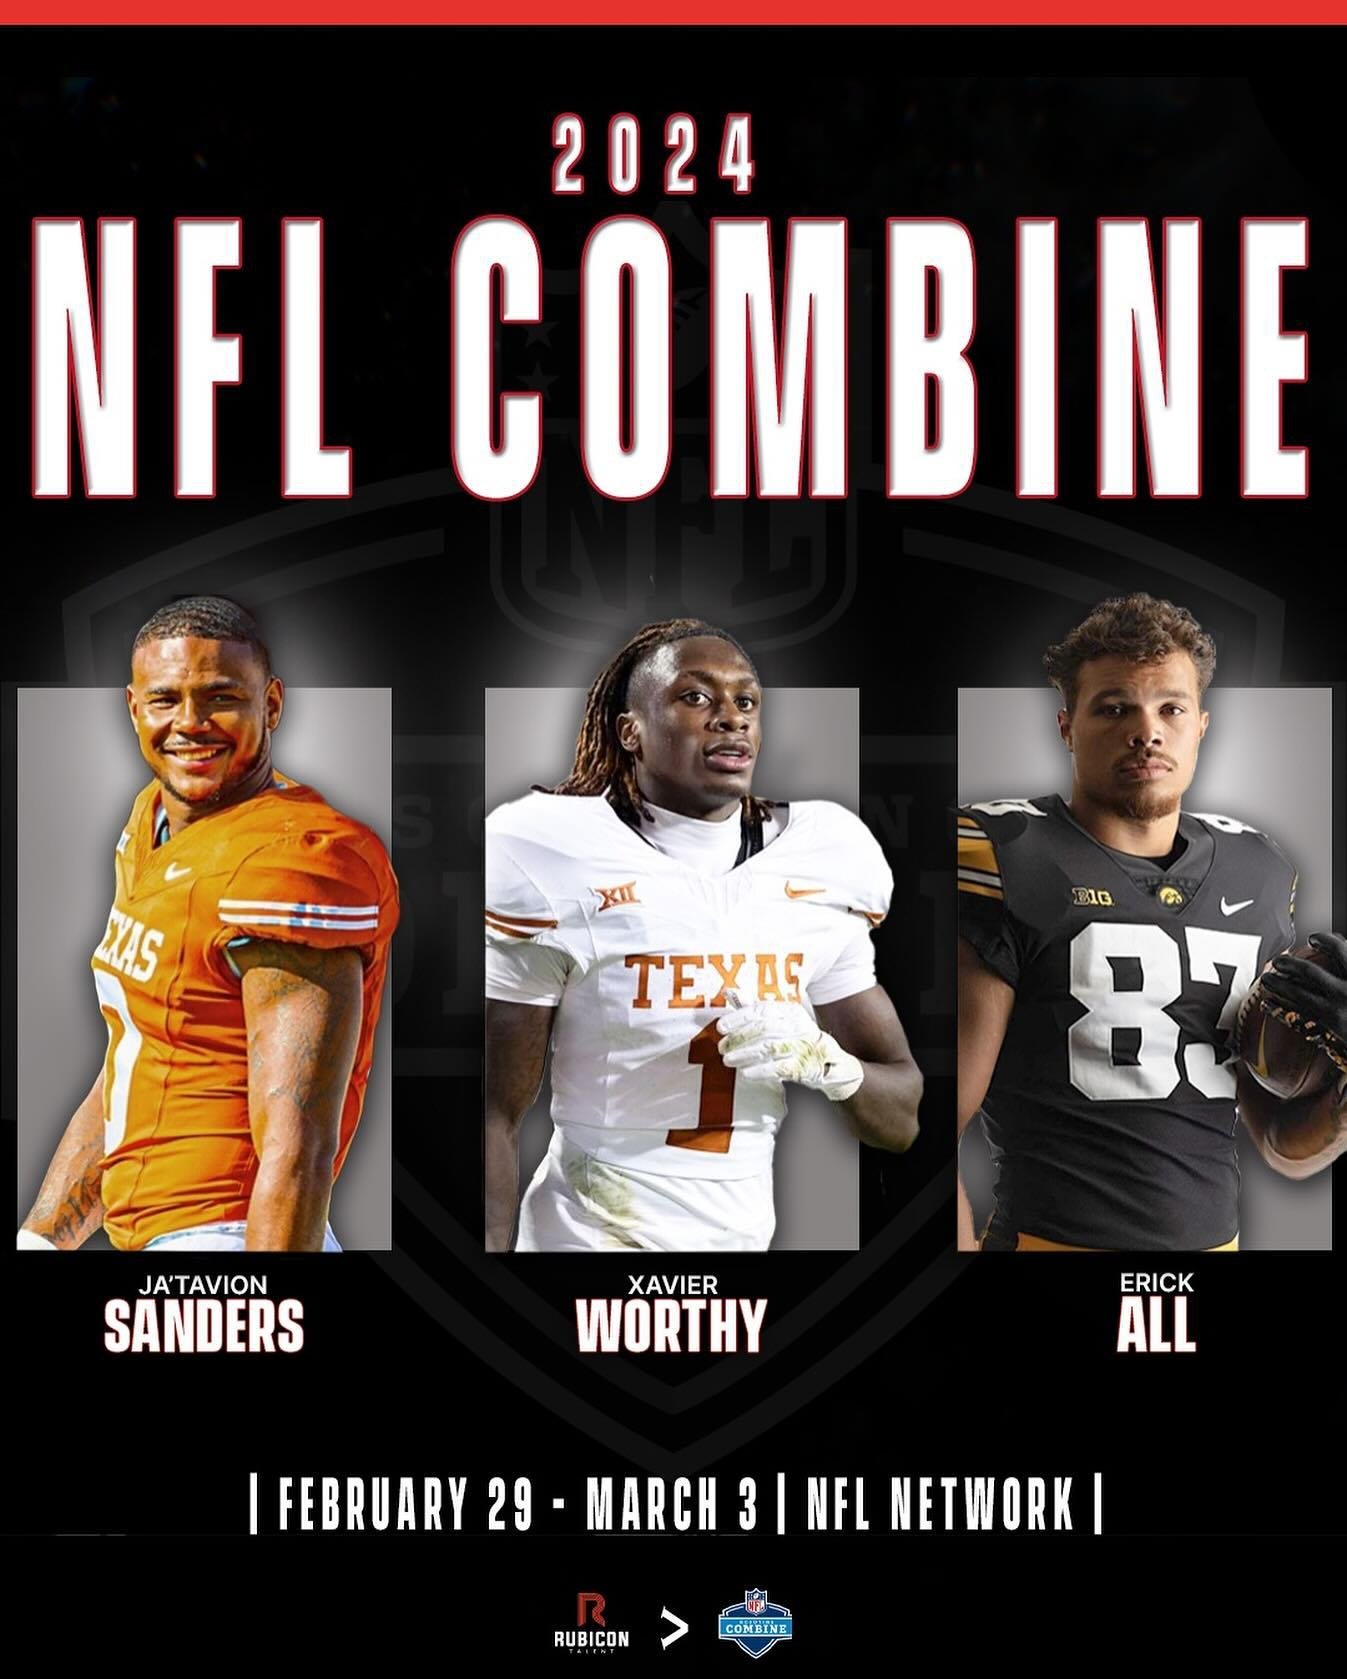 Wishing our guys the best of luck at the #NFLCombine 🏈

📺: #NFLCombine @nflnetwork